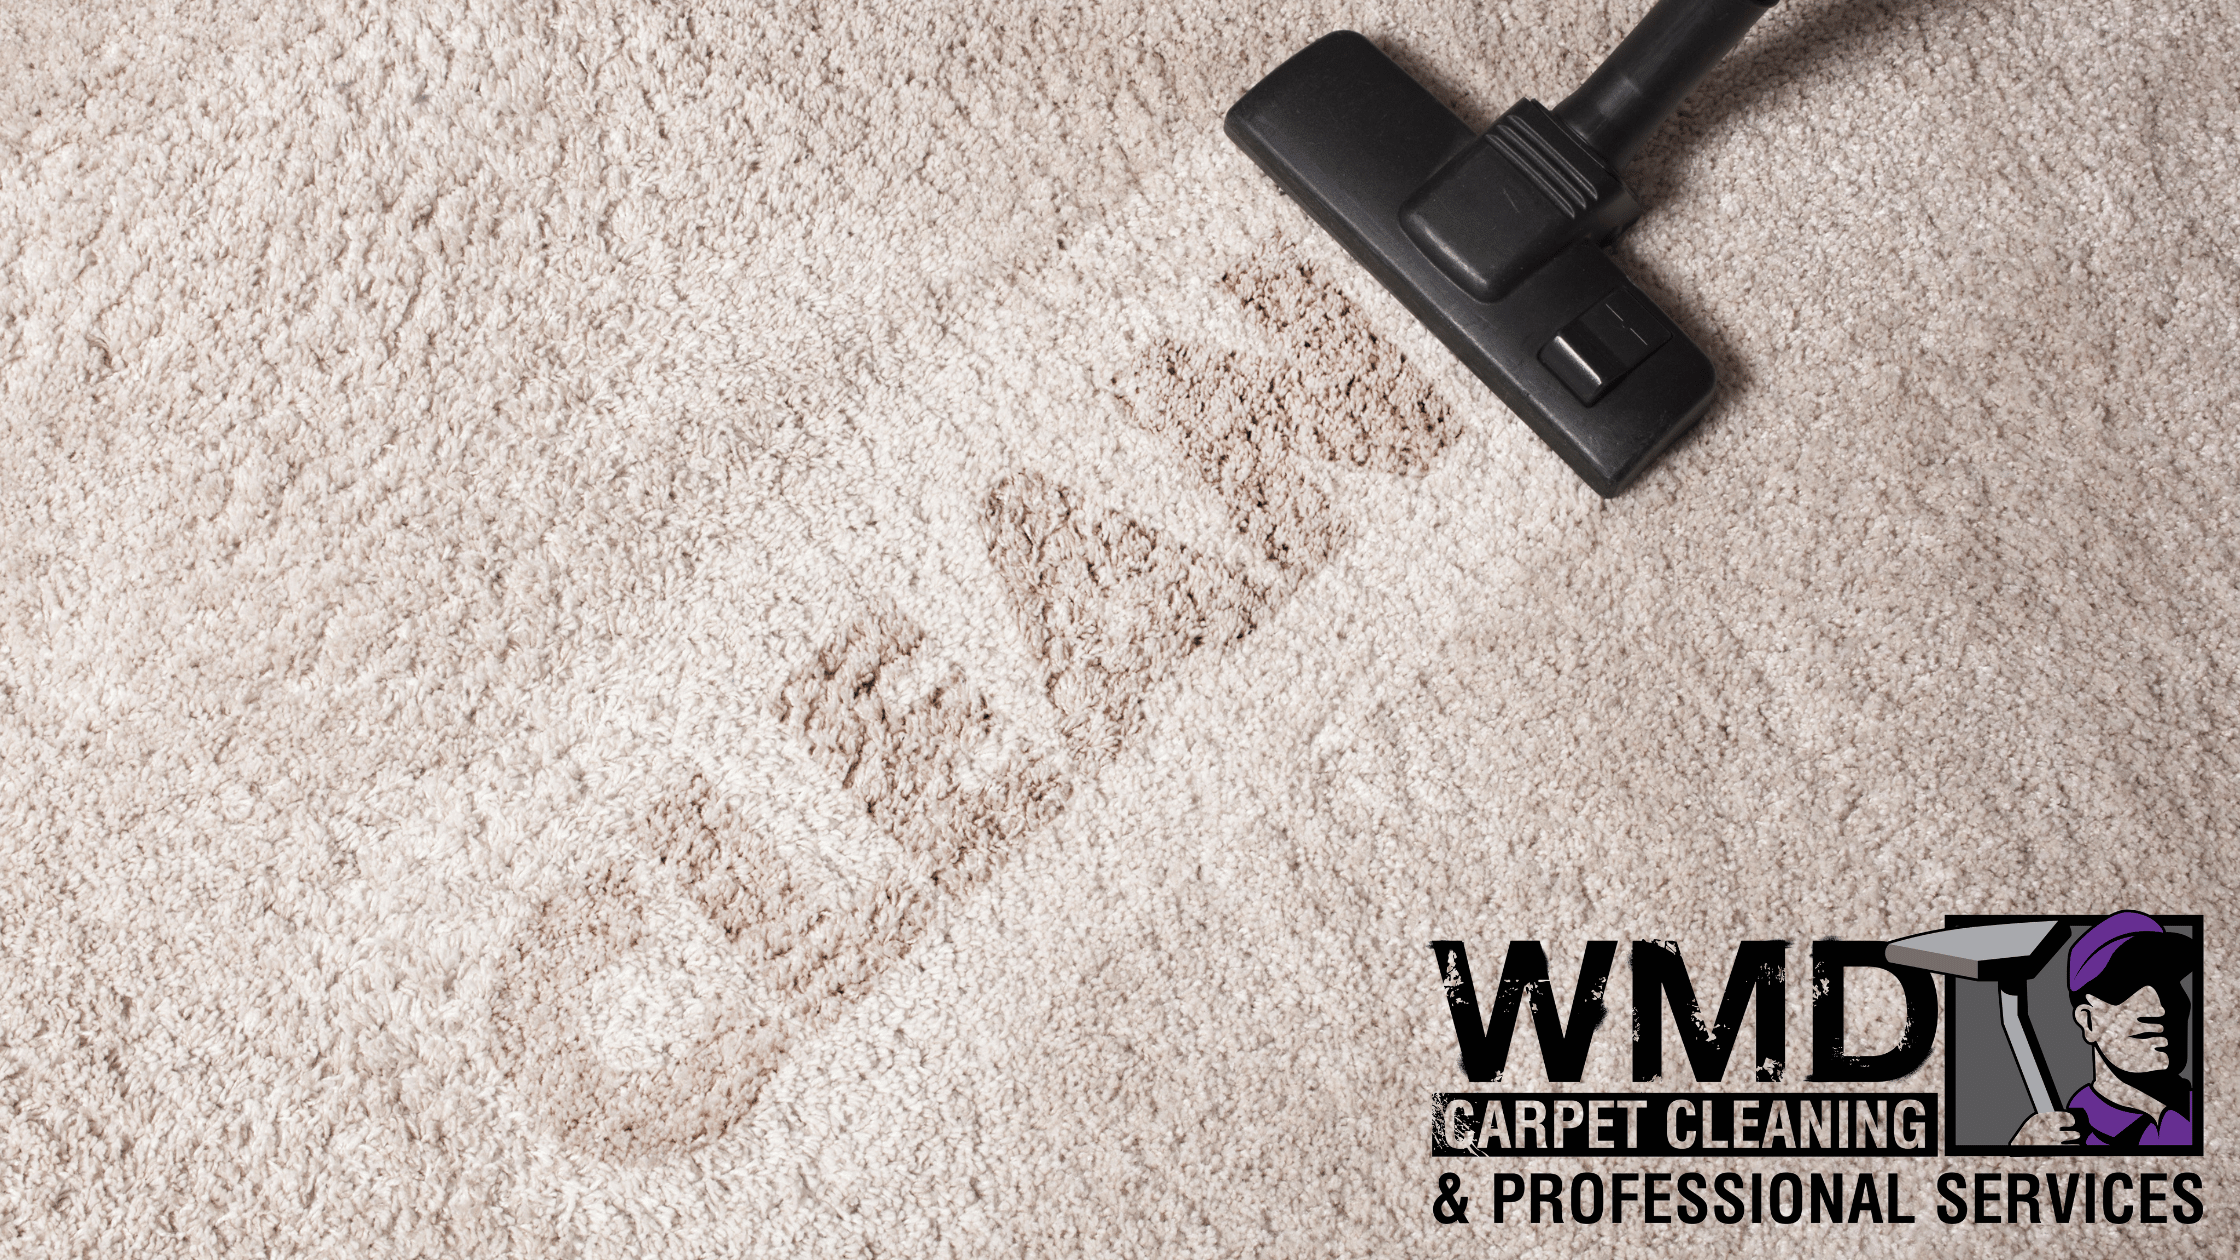 WMD Carpet Cleaning & Professional Services Grand Junction